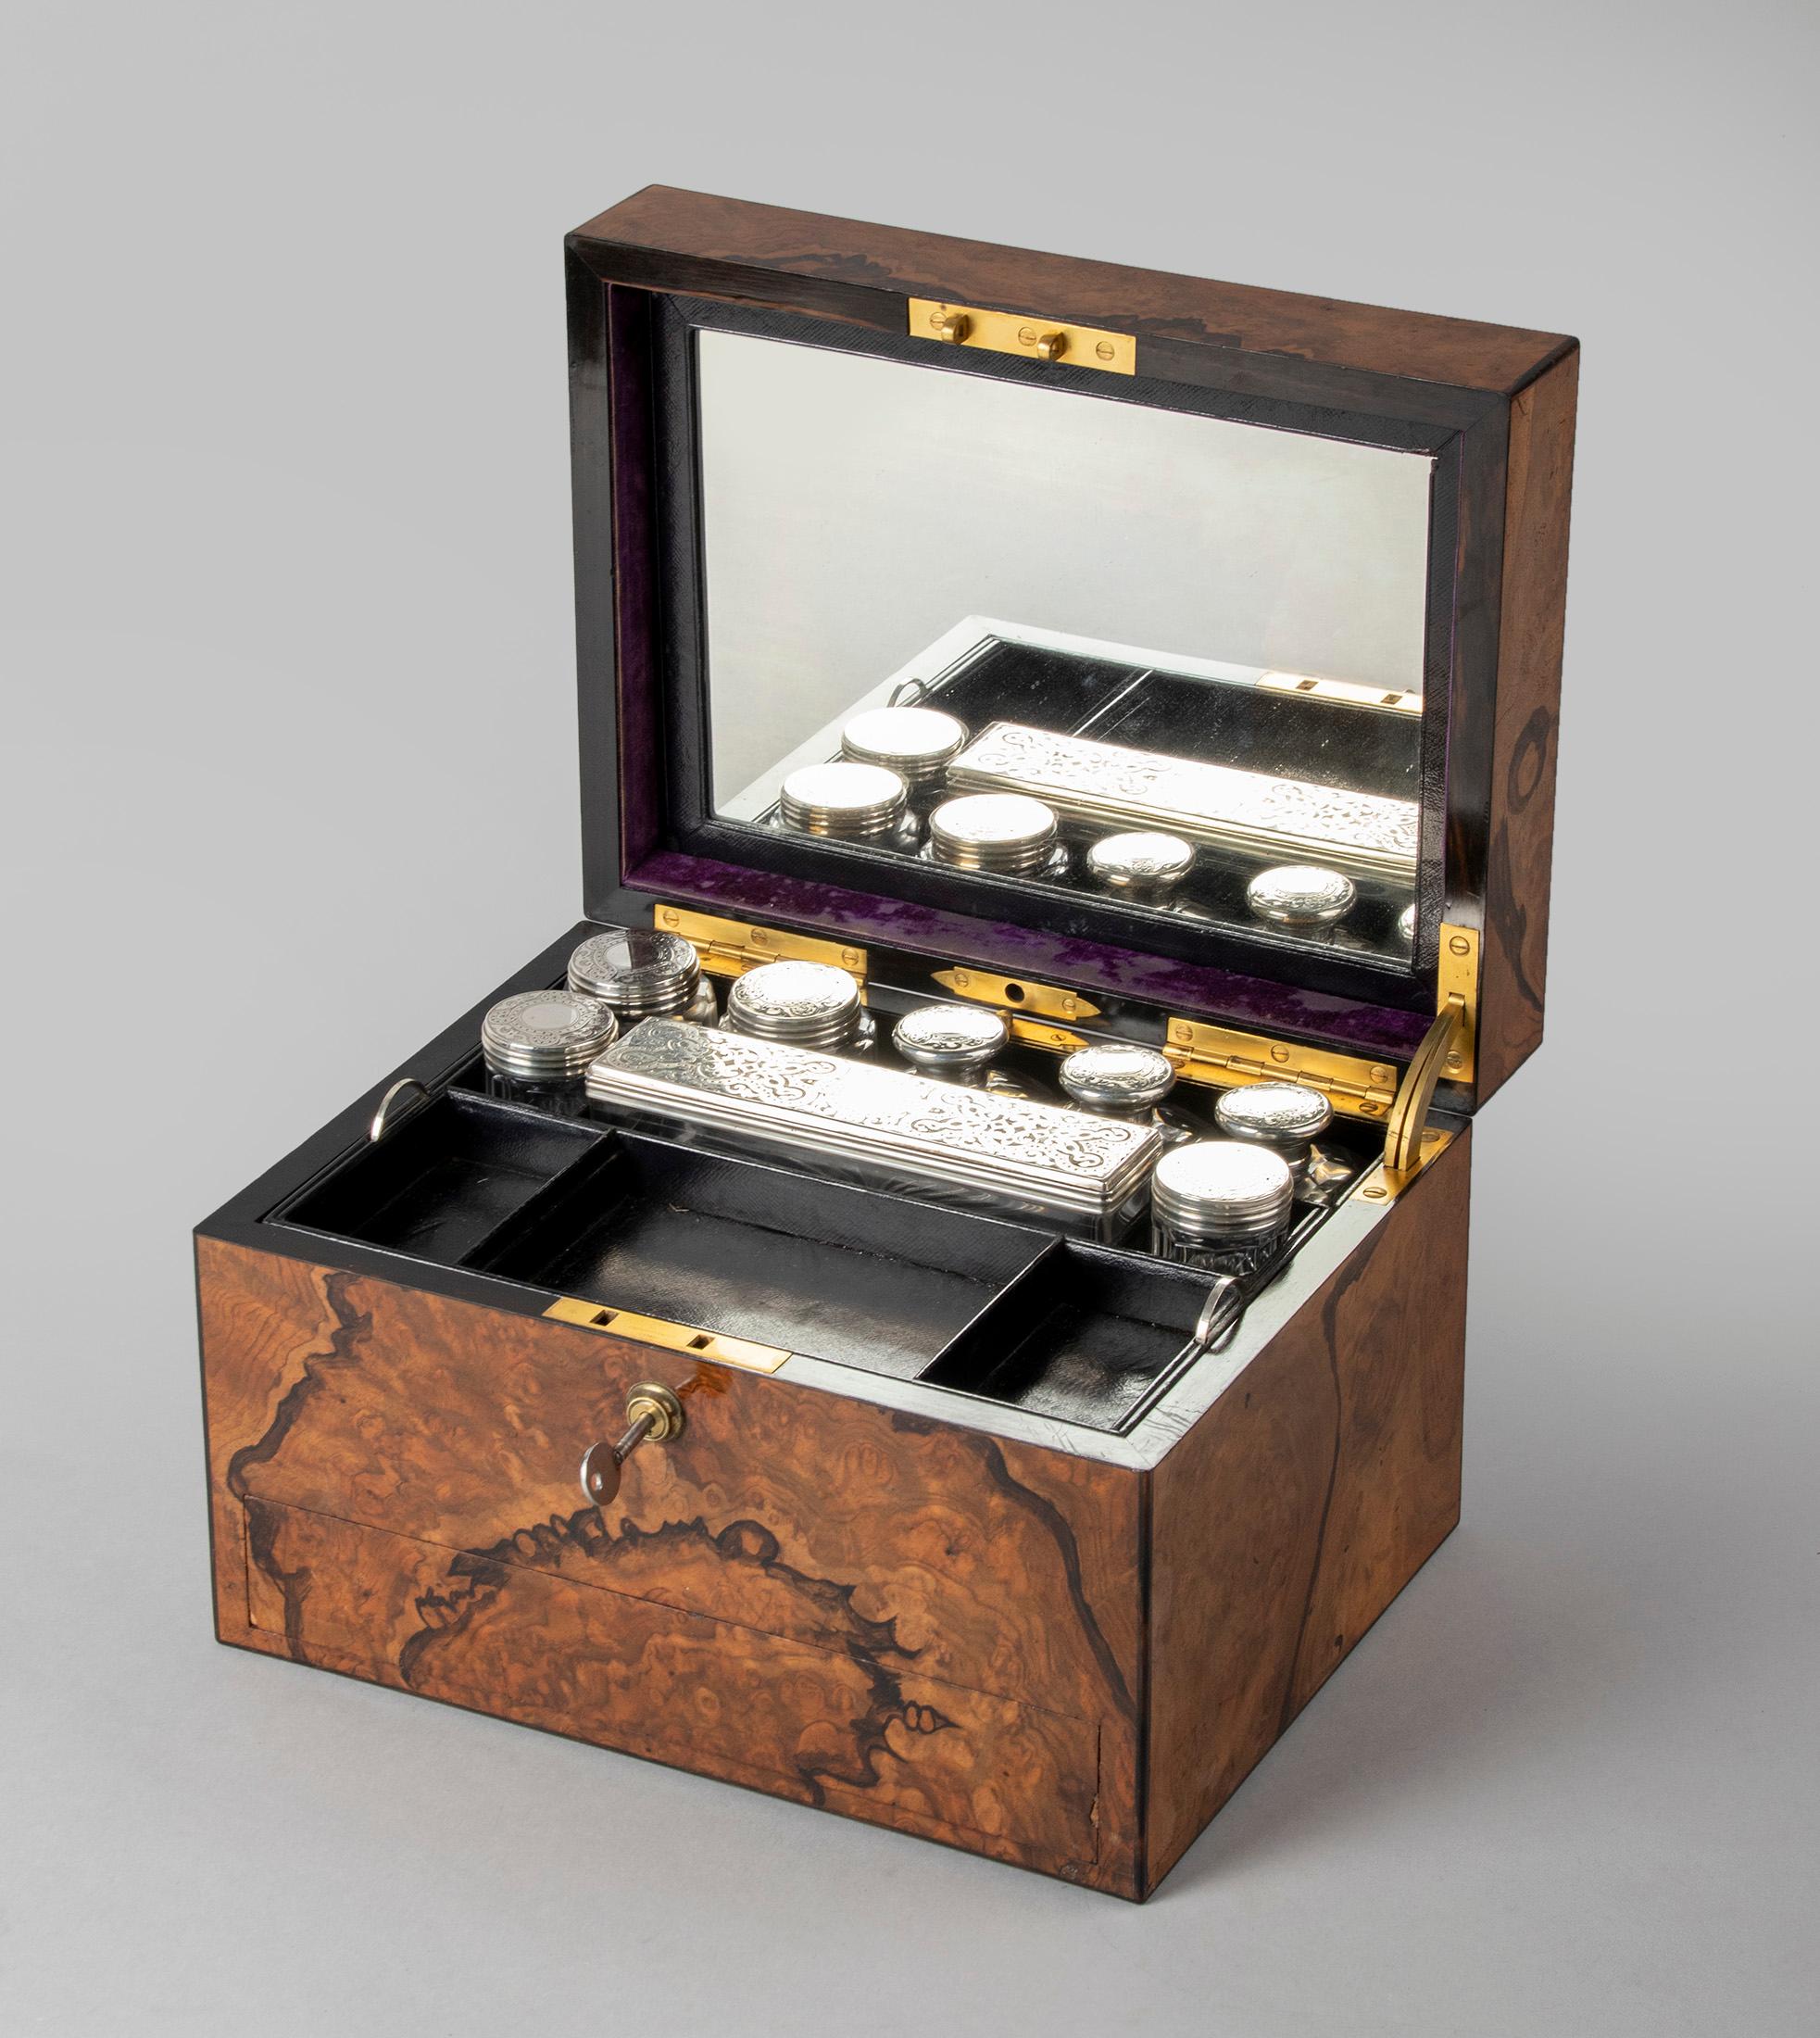 Beautiful feathered walnut, brass bound, vanity box by the famous makers “Betjemann & Sons” of London. This vanity box has several compartments and the attention to detail is fabulous. The walnut veneer has been enhanced using a feather and ink to